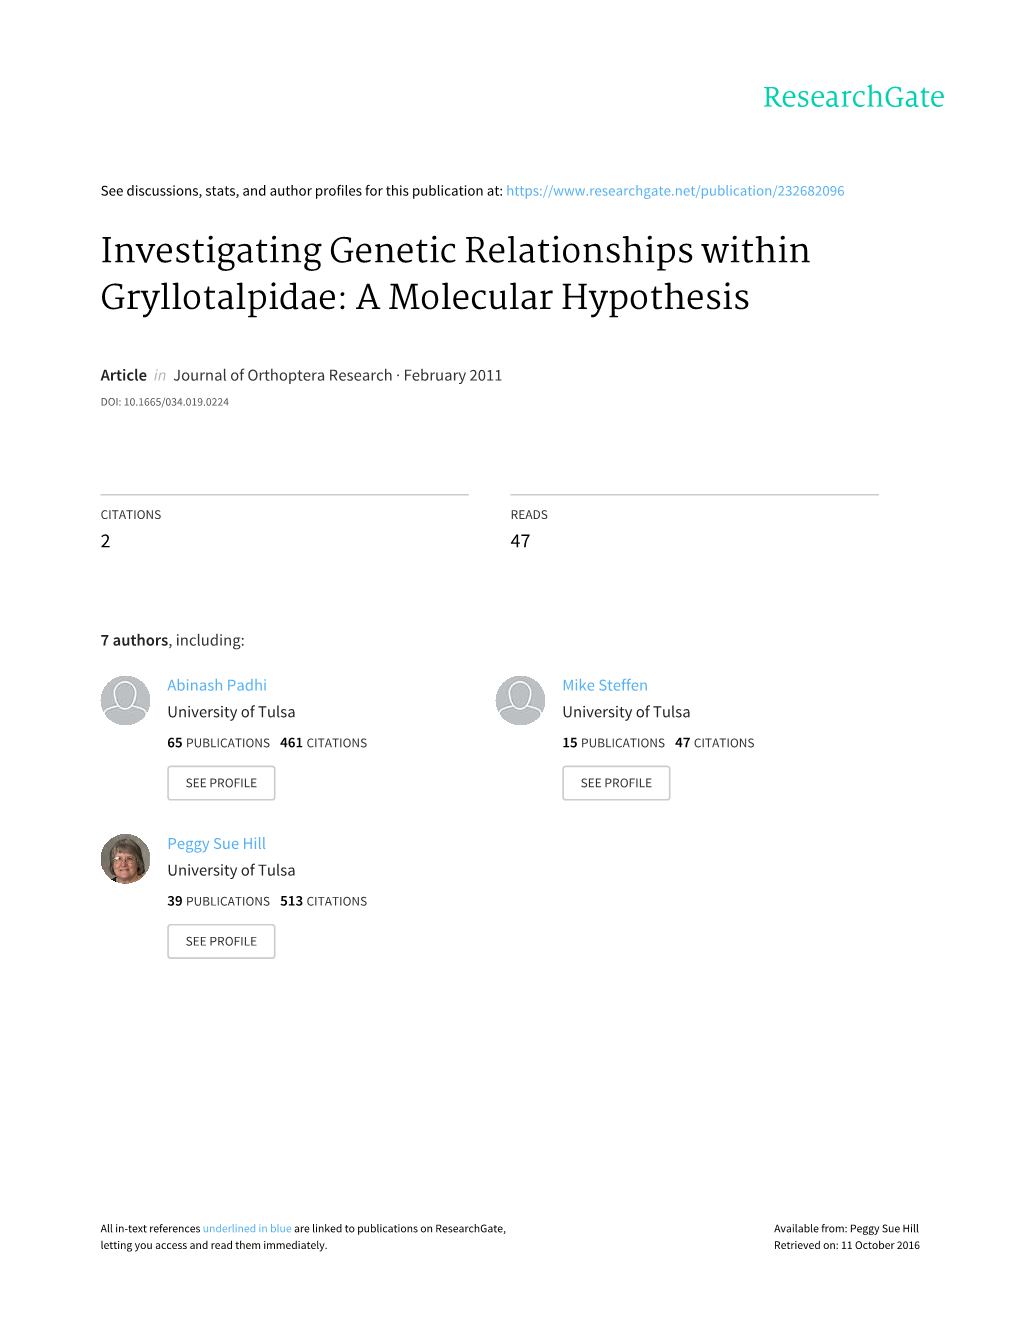 Investigating Genetic Relationships Within Gryllotalpidae: a Molecular Hypothesis